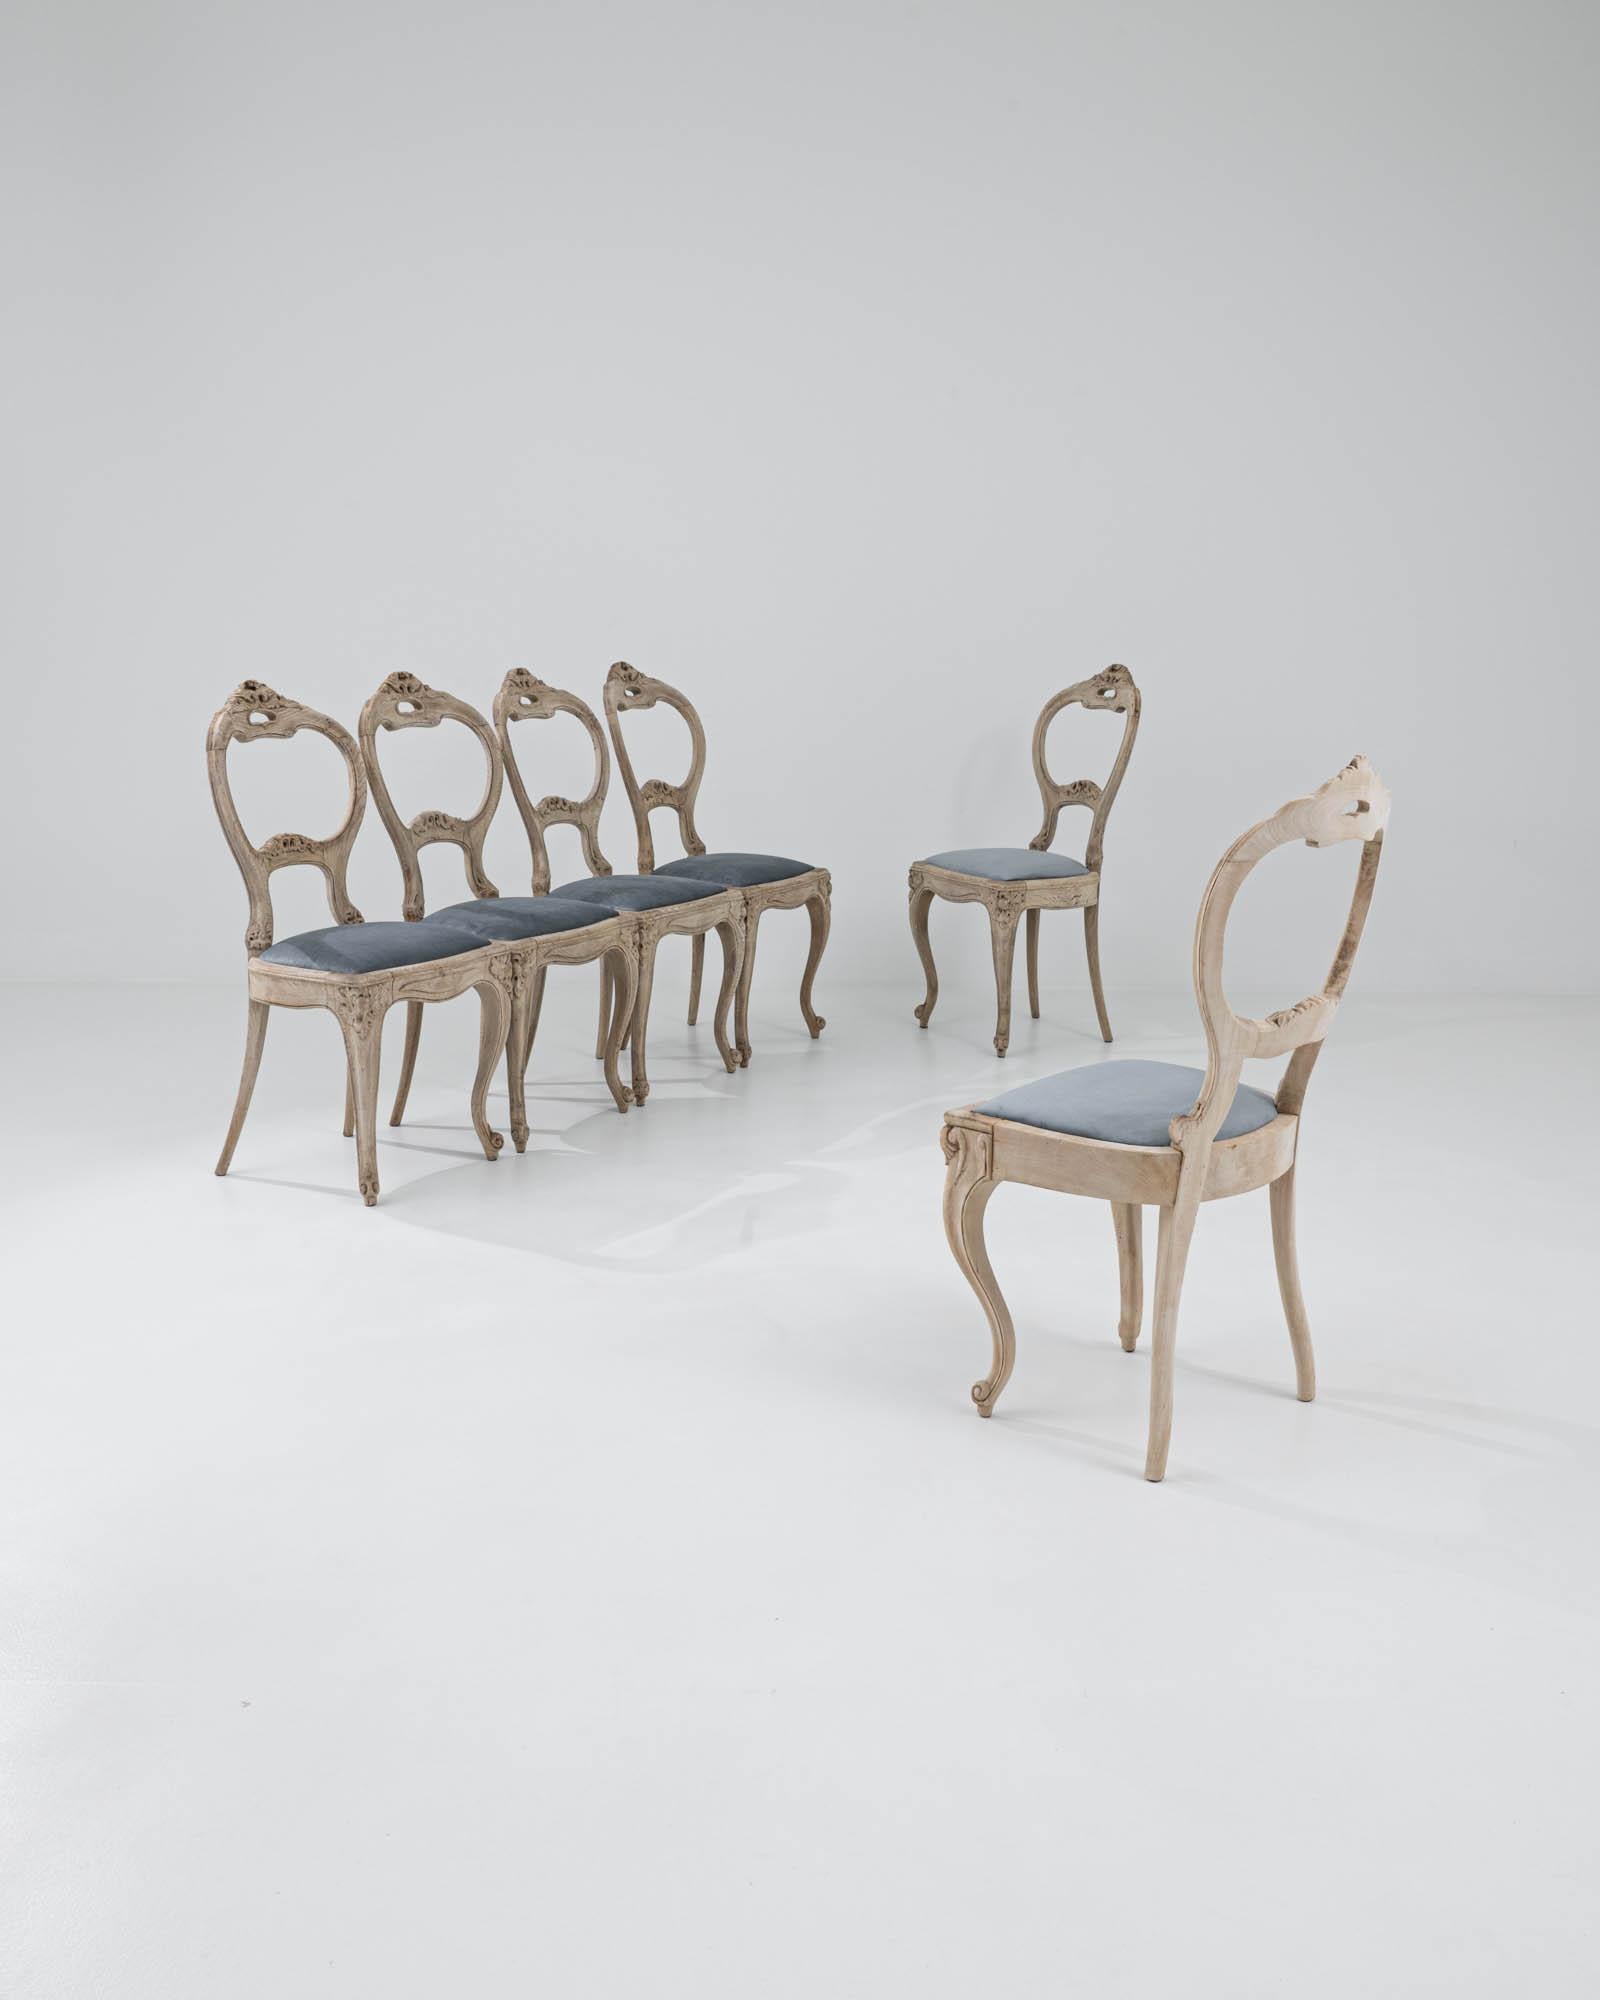 Handcrafted in early 19th-century France, these dining chairs captivate with their graceful, curvilinear silhouettes. The round backrests feature exquisitely carved foliate details that harmonize with the elegant curves of the cabriole legs,